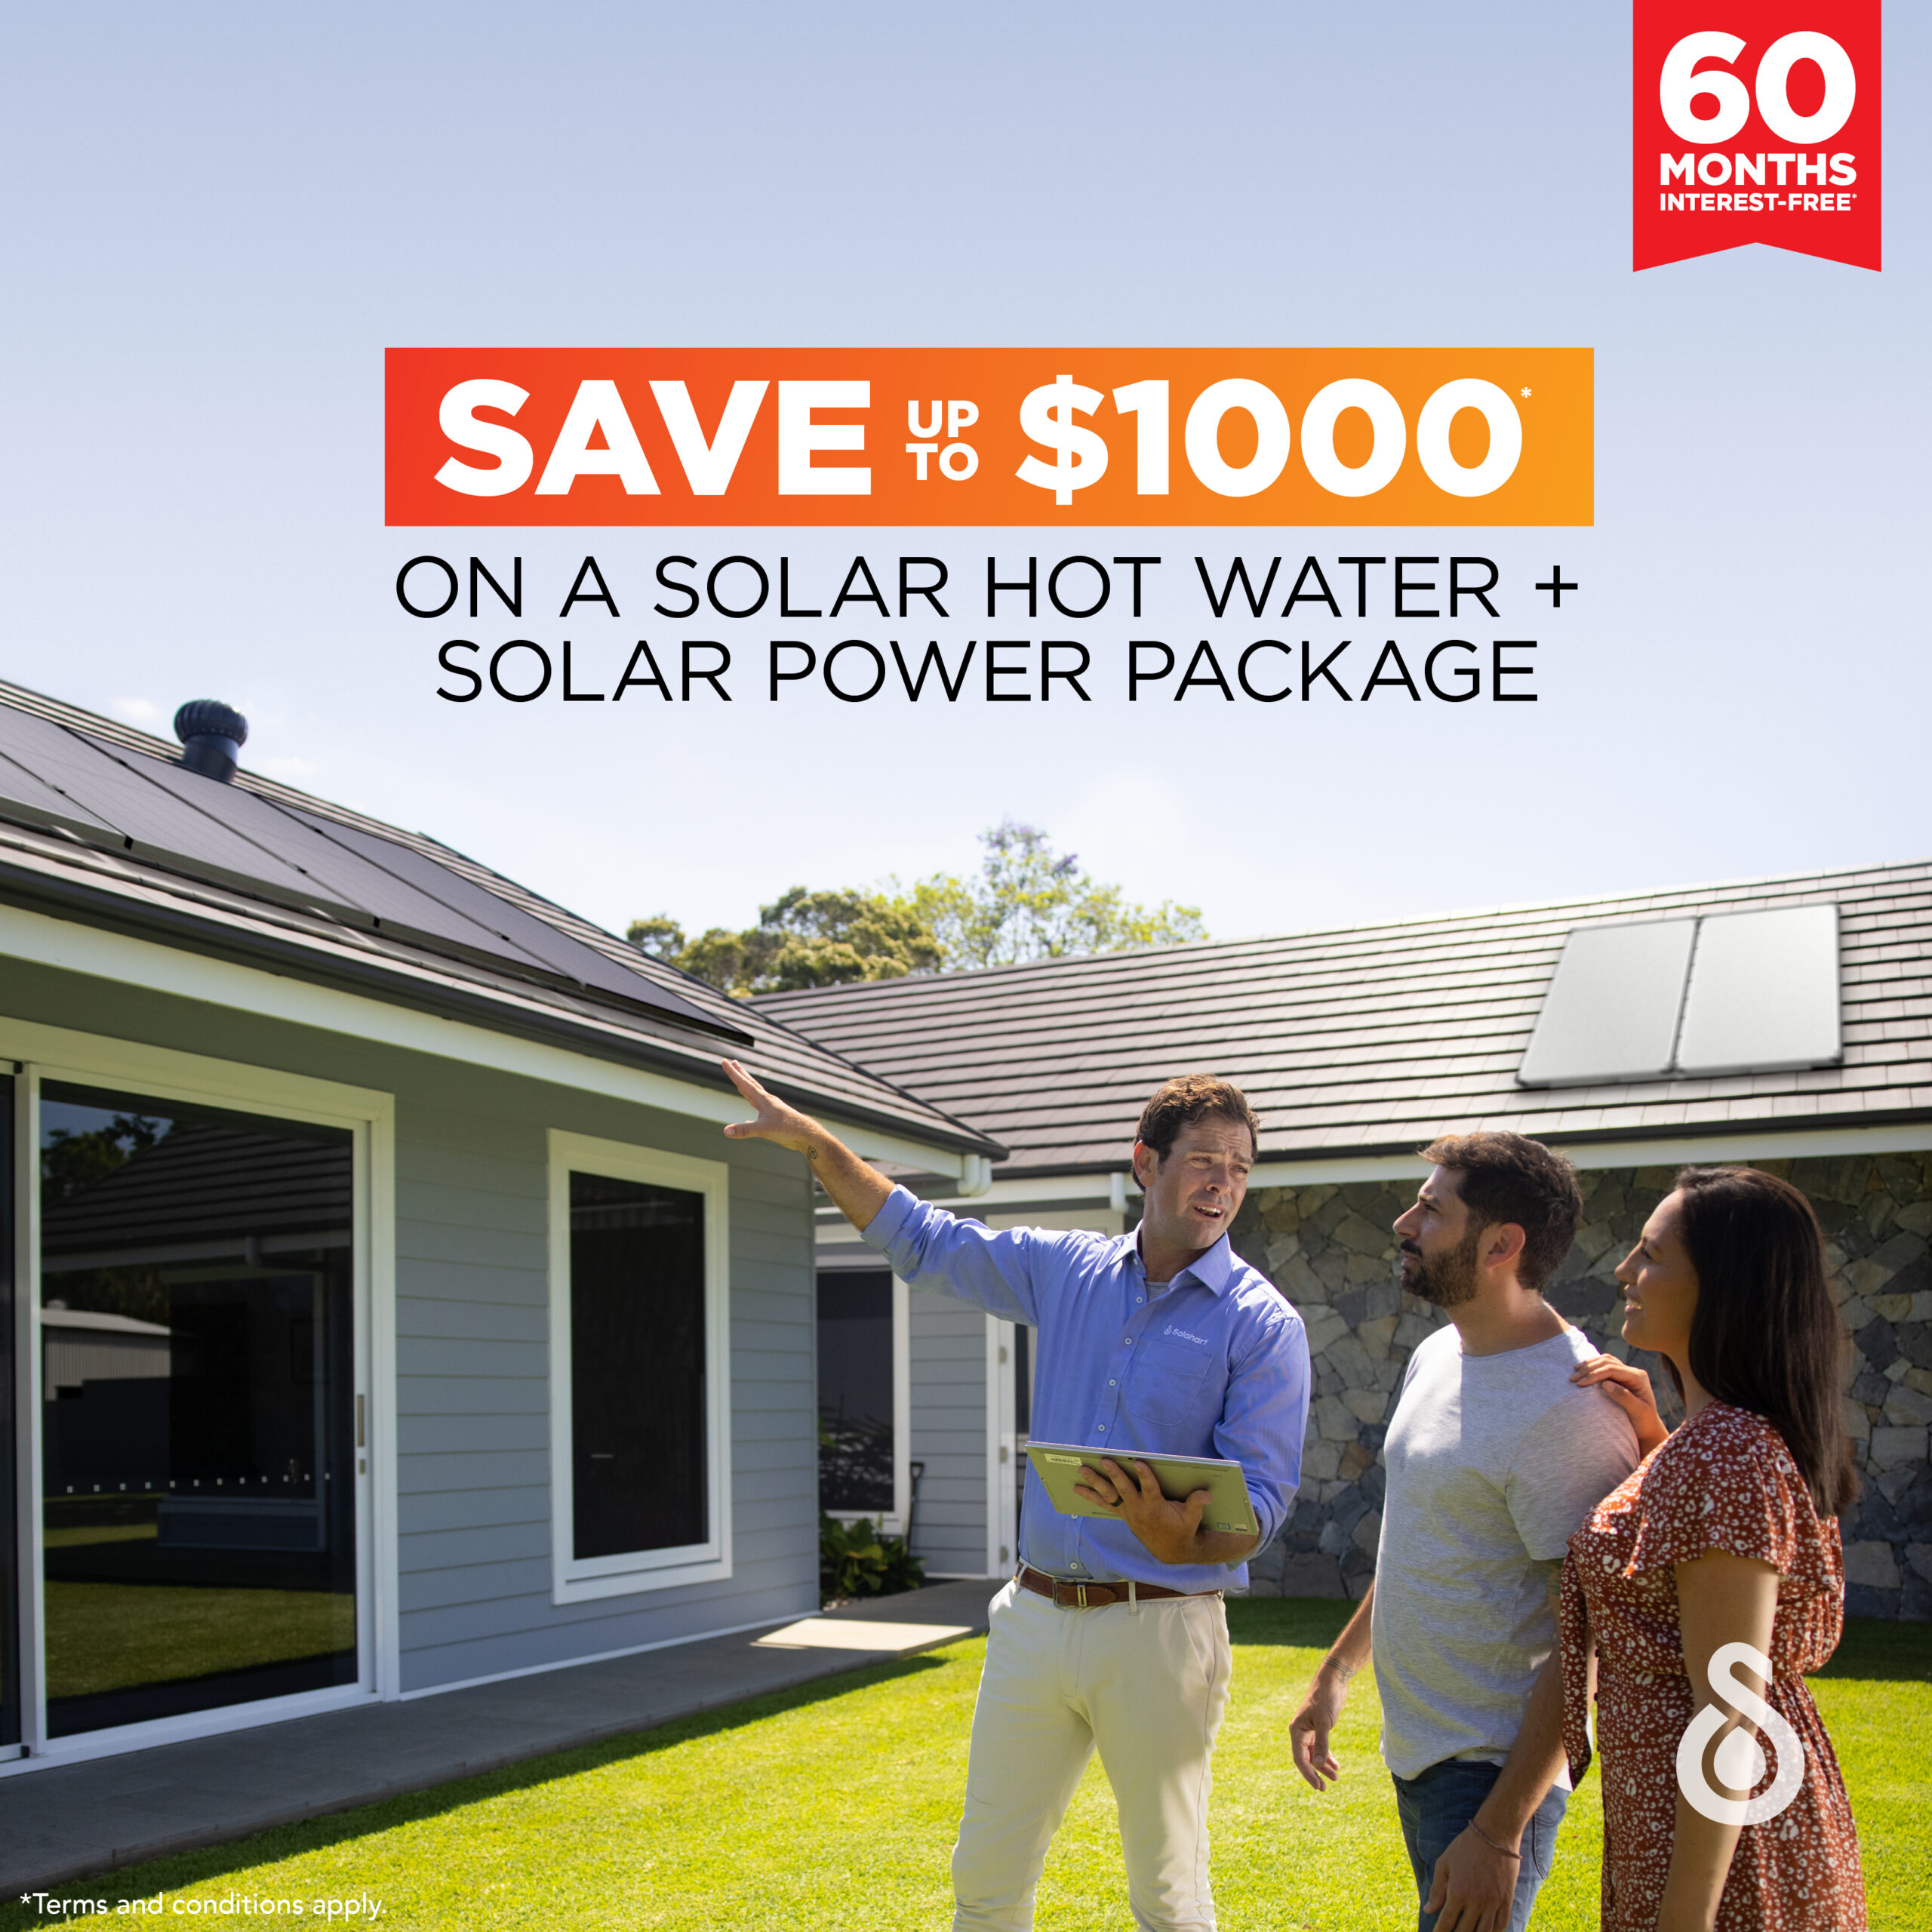 Solahart 60 month interest-free and save up to $1000 on a solar hot water and solar power package